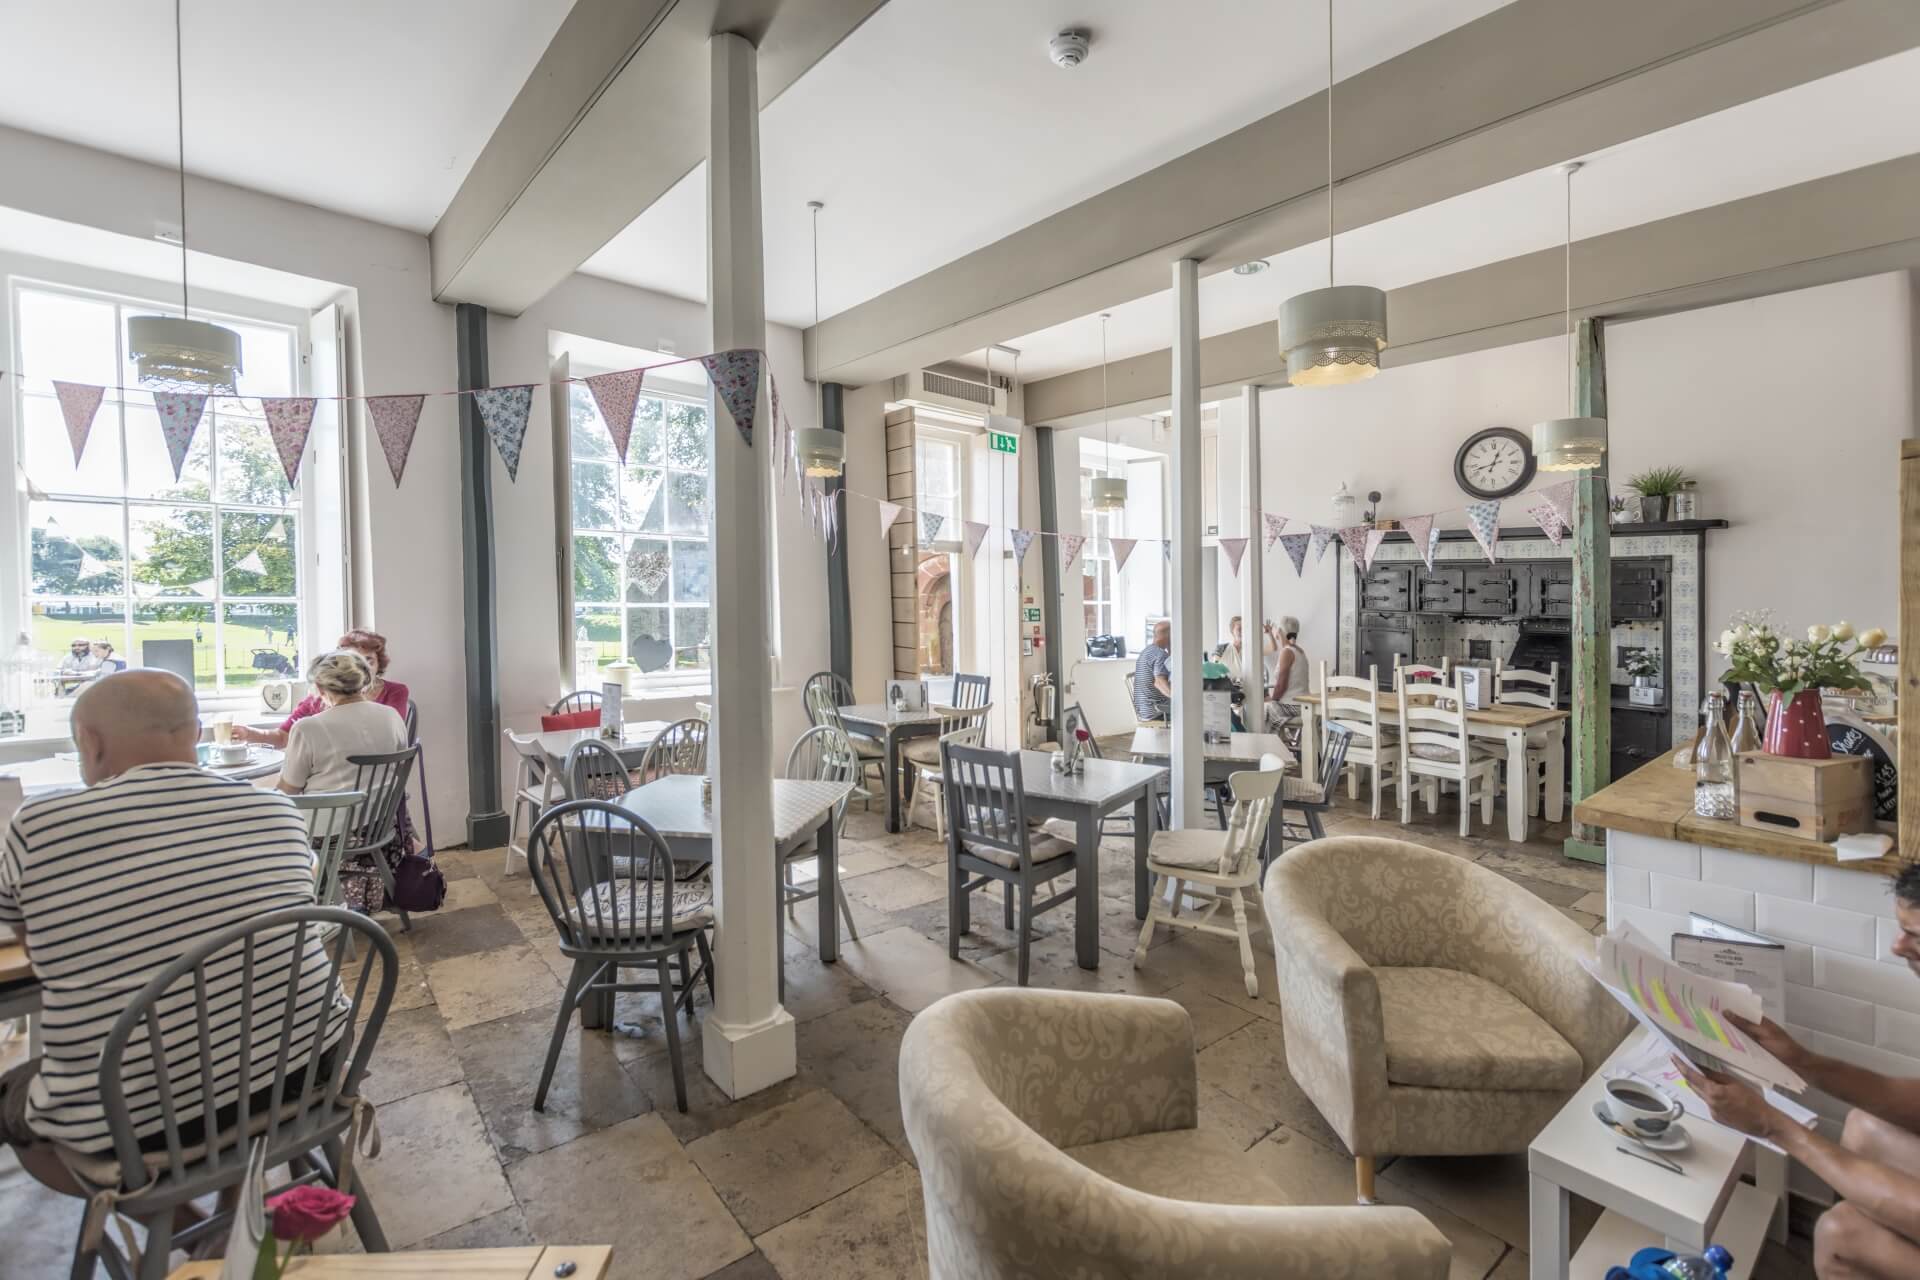 Torre Abbey Tea Rooms - Dog friendly Place to eat in Torquay